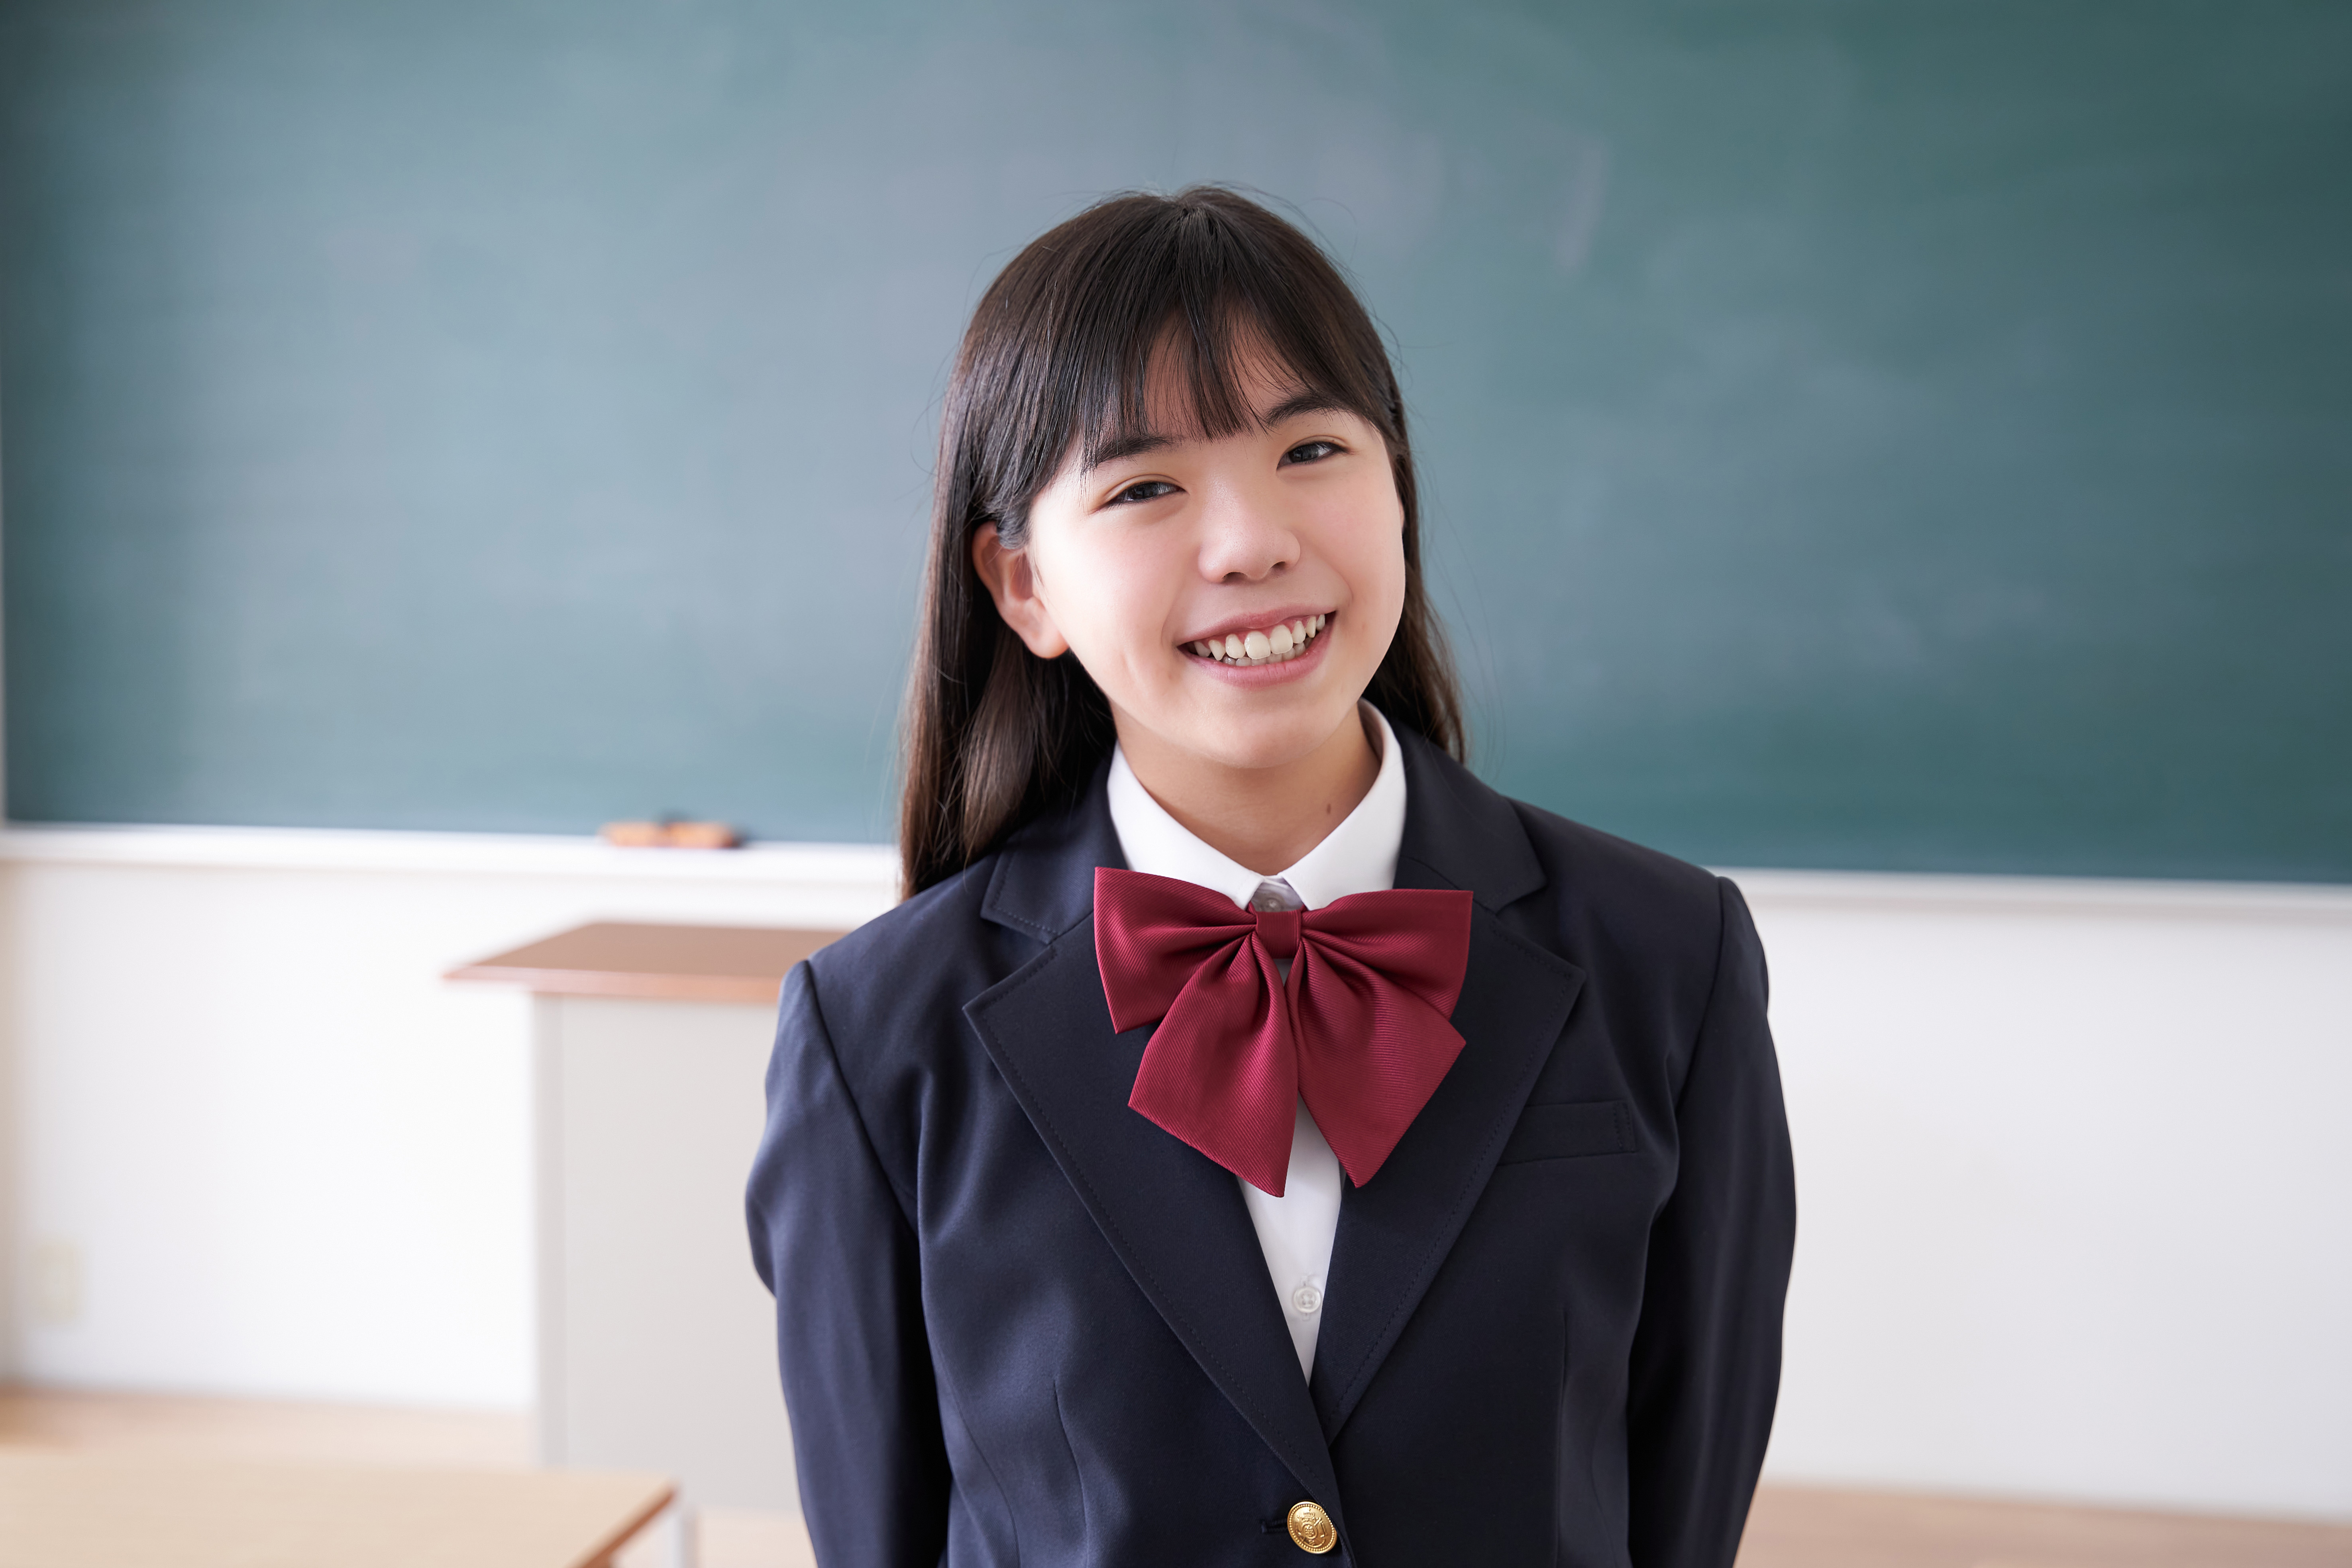 A Japanese junior high school girl stands in the classroom with a smile